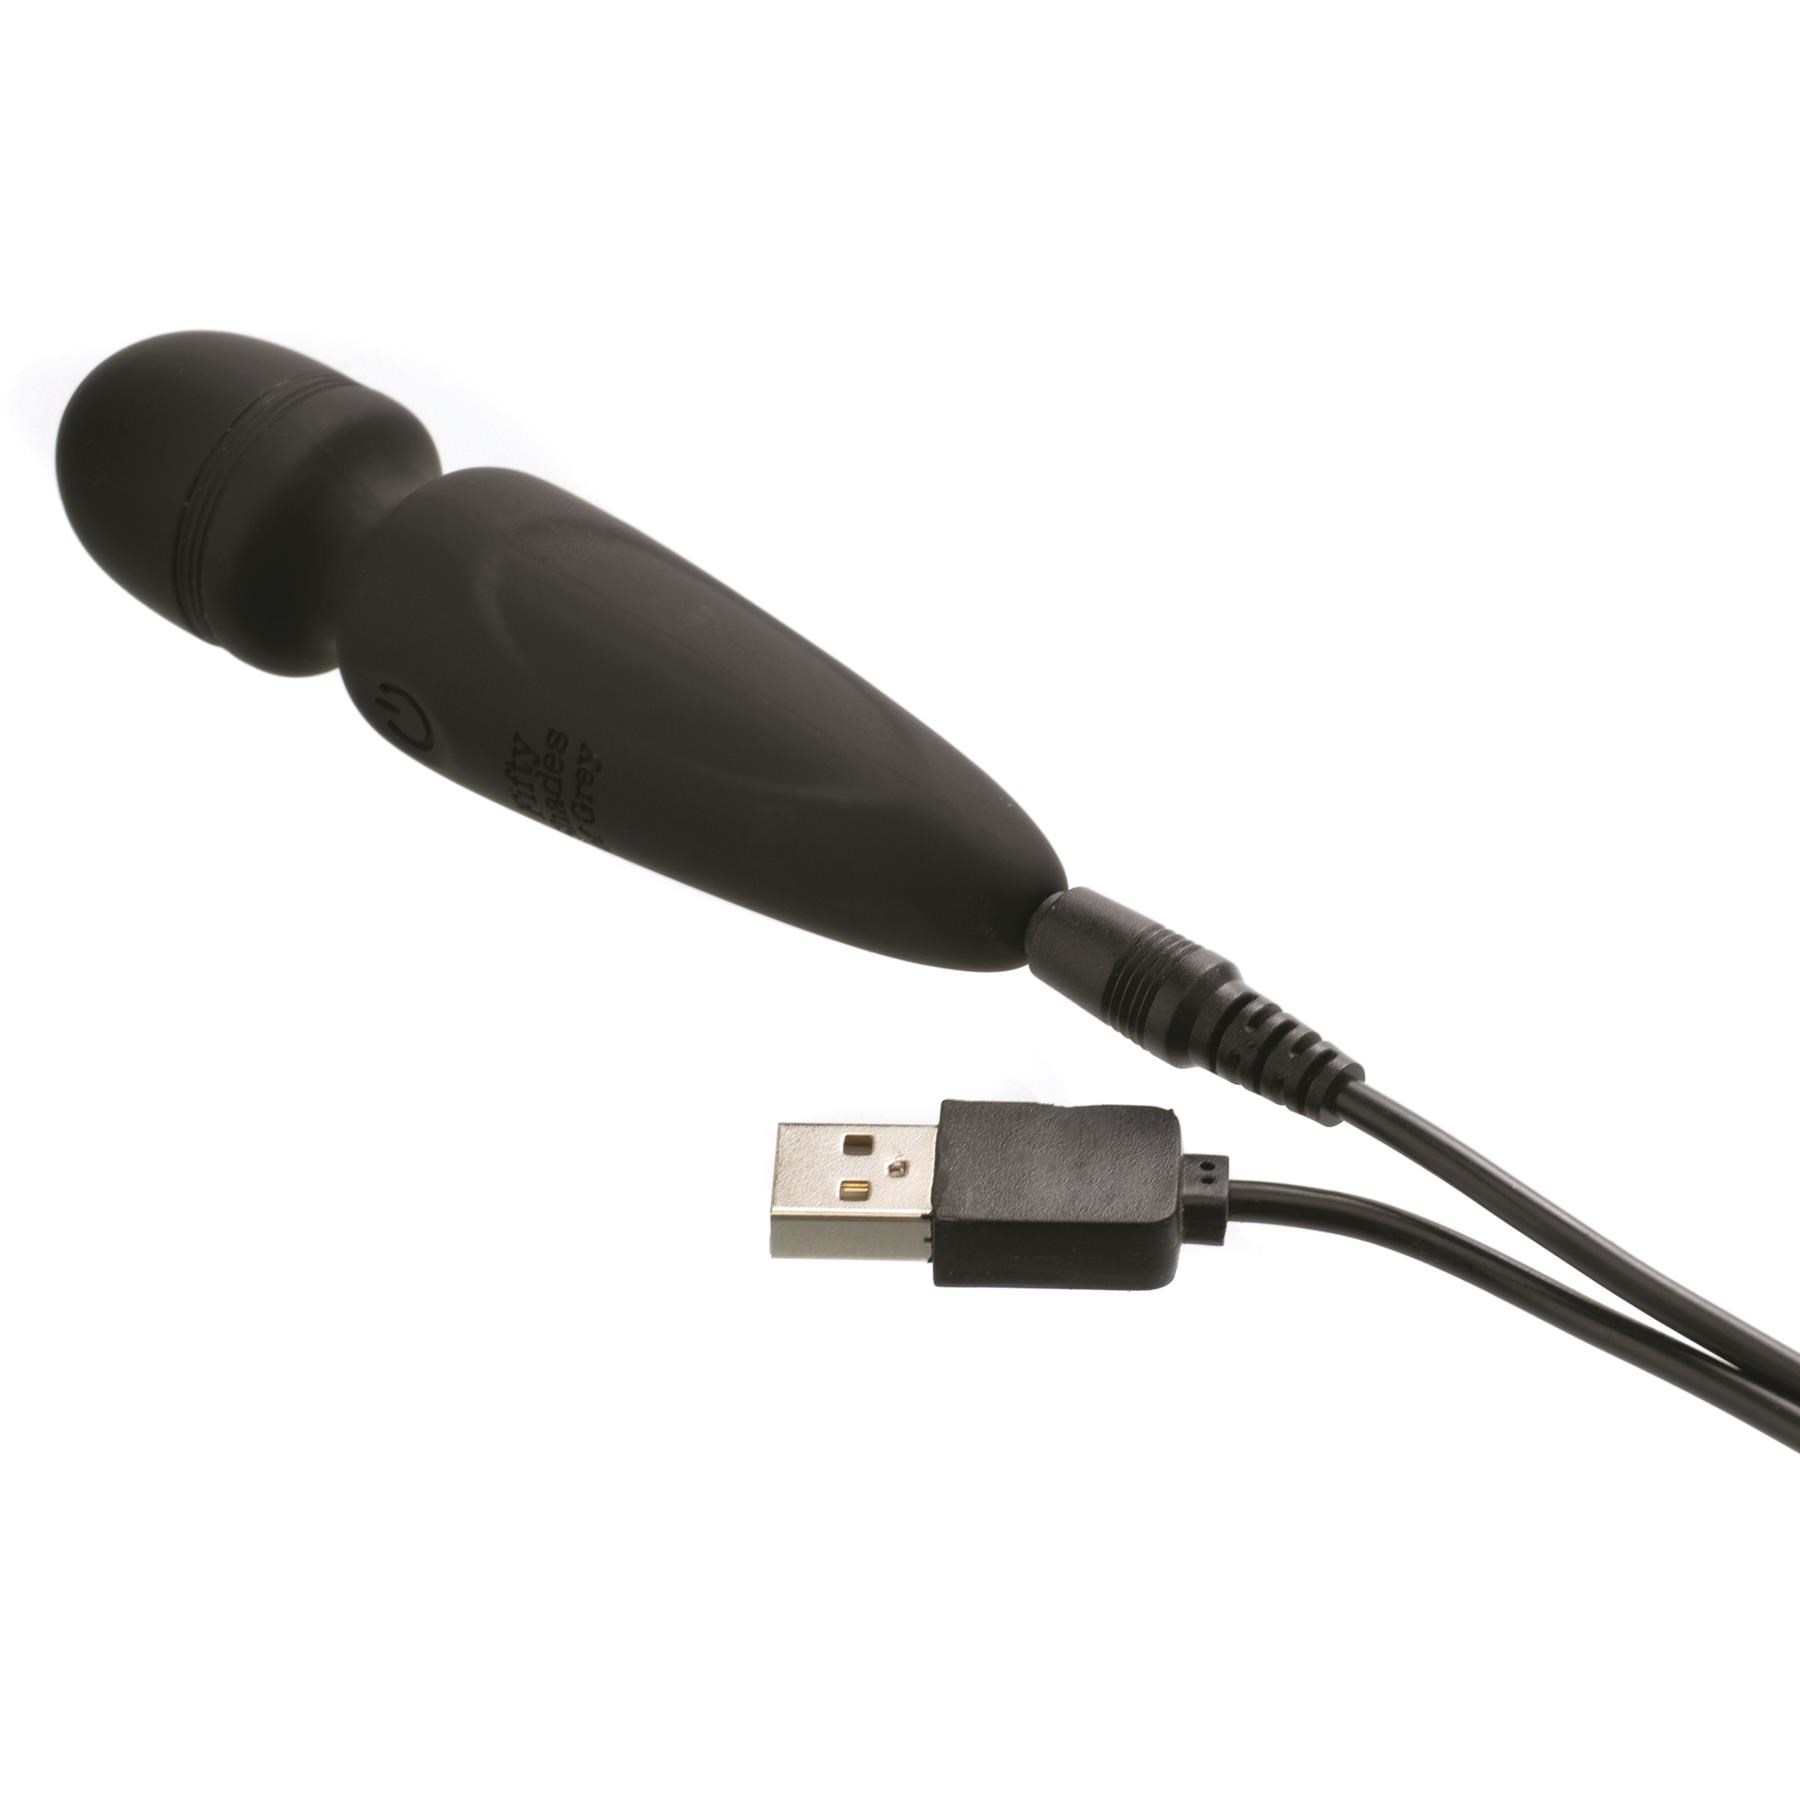 Fifty Shades of Grey Sensation Mini Wand Massager-Showing Where Charger is Placed